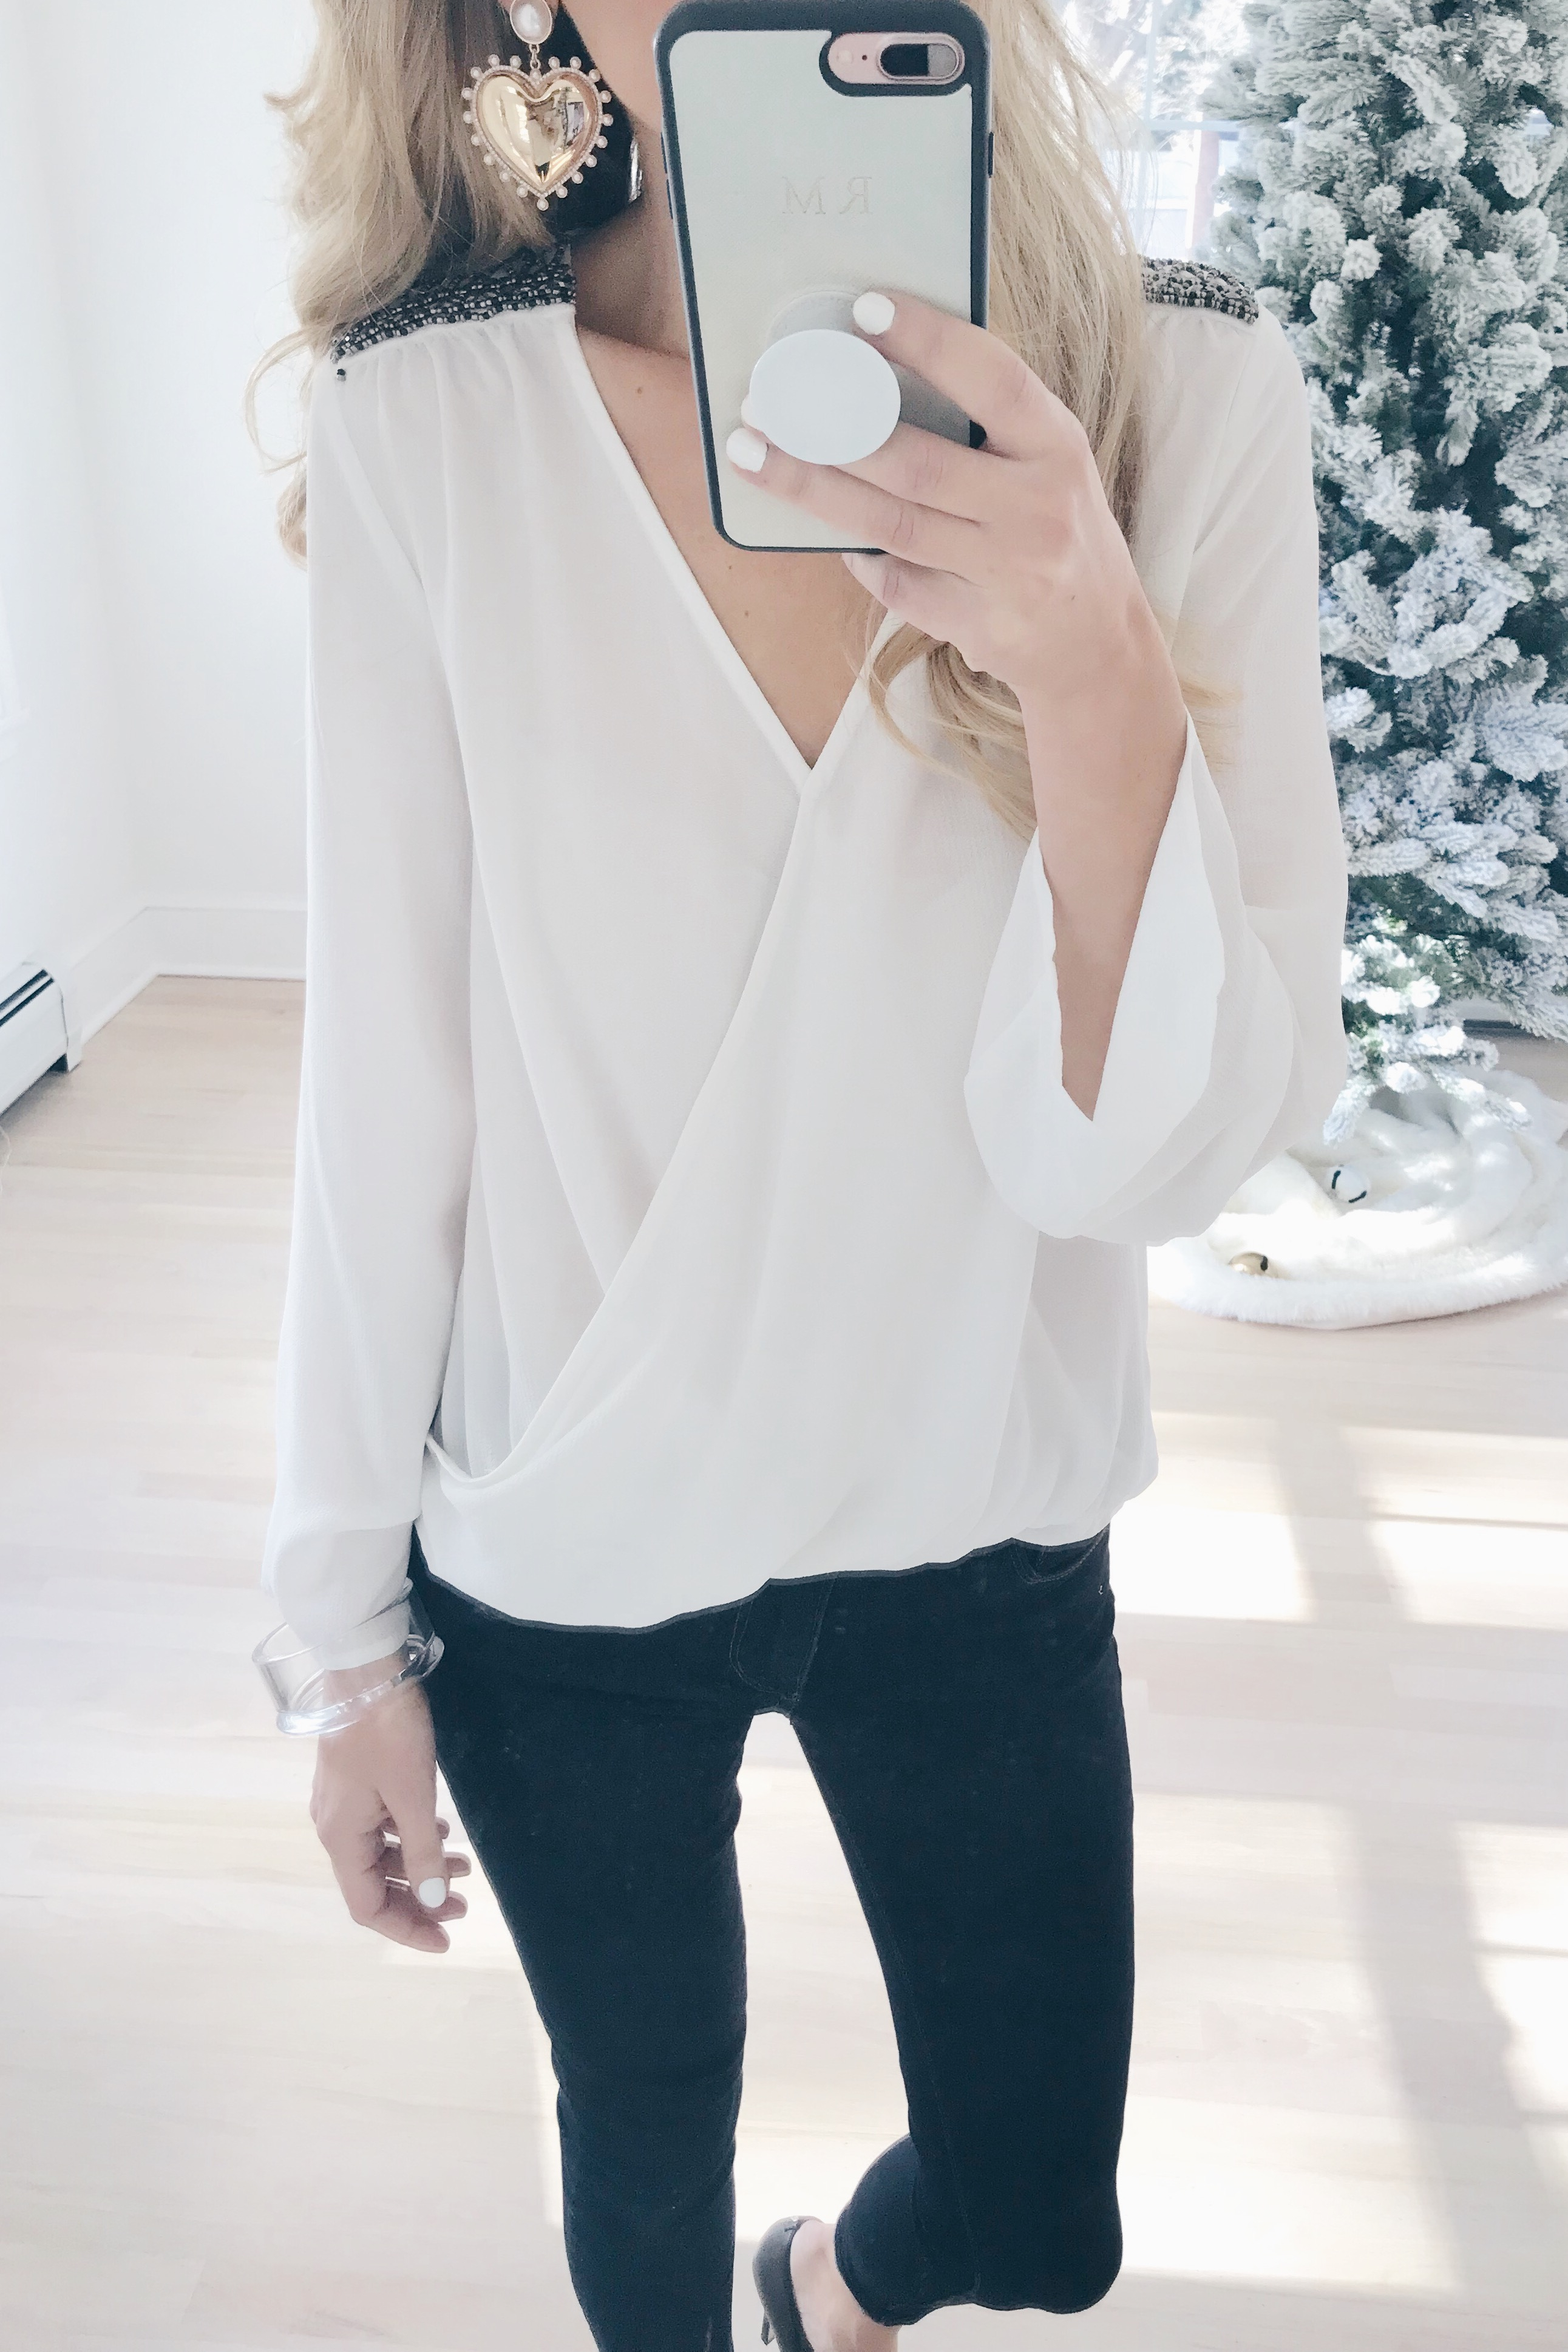  holiday outfit ideas - embellished shoulder top from gibson glam collection on pinteresting plans blog